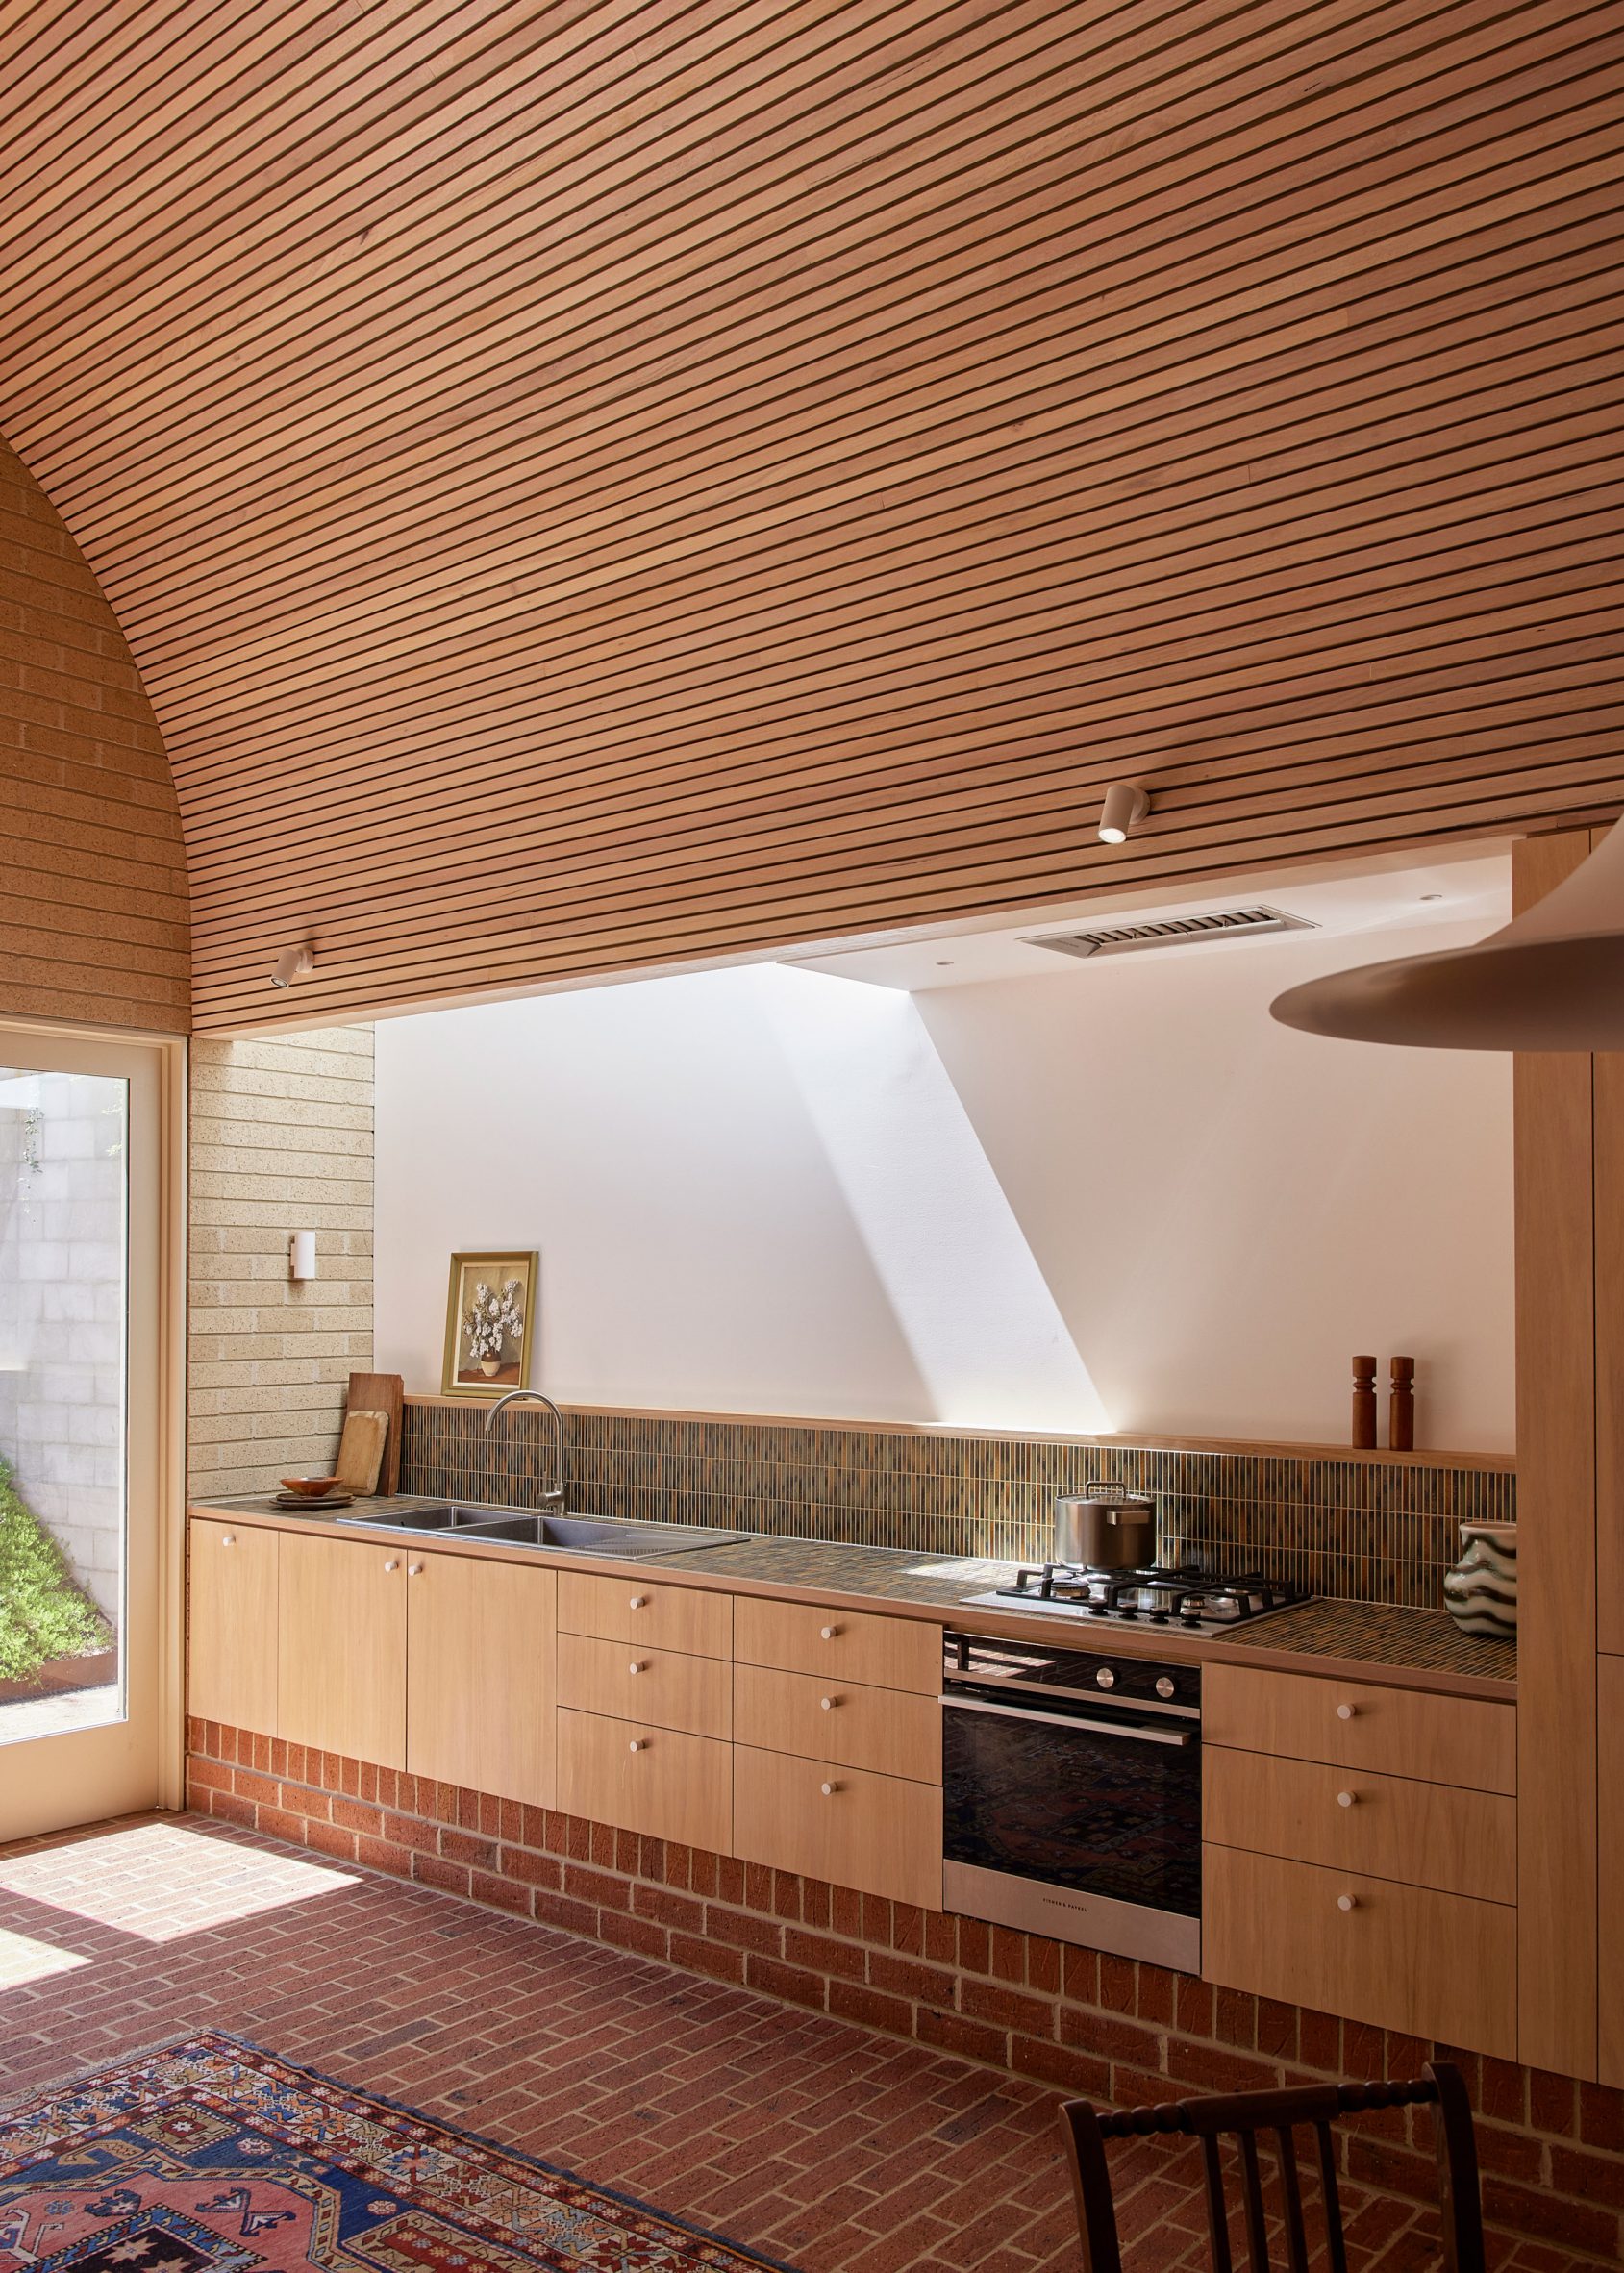 Kitchen area within residential extension by So Architecture